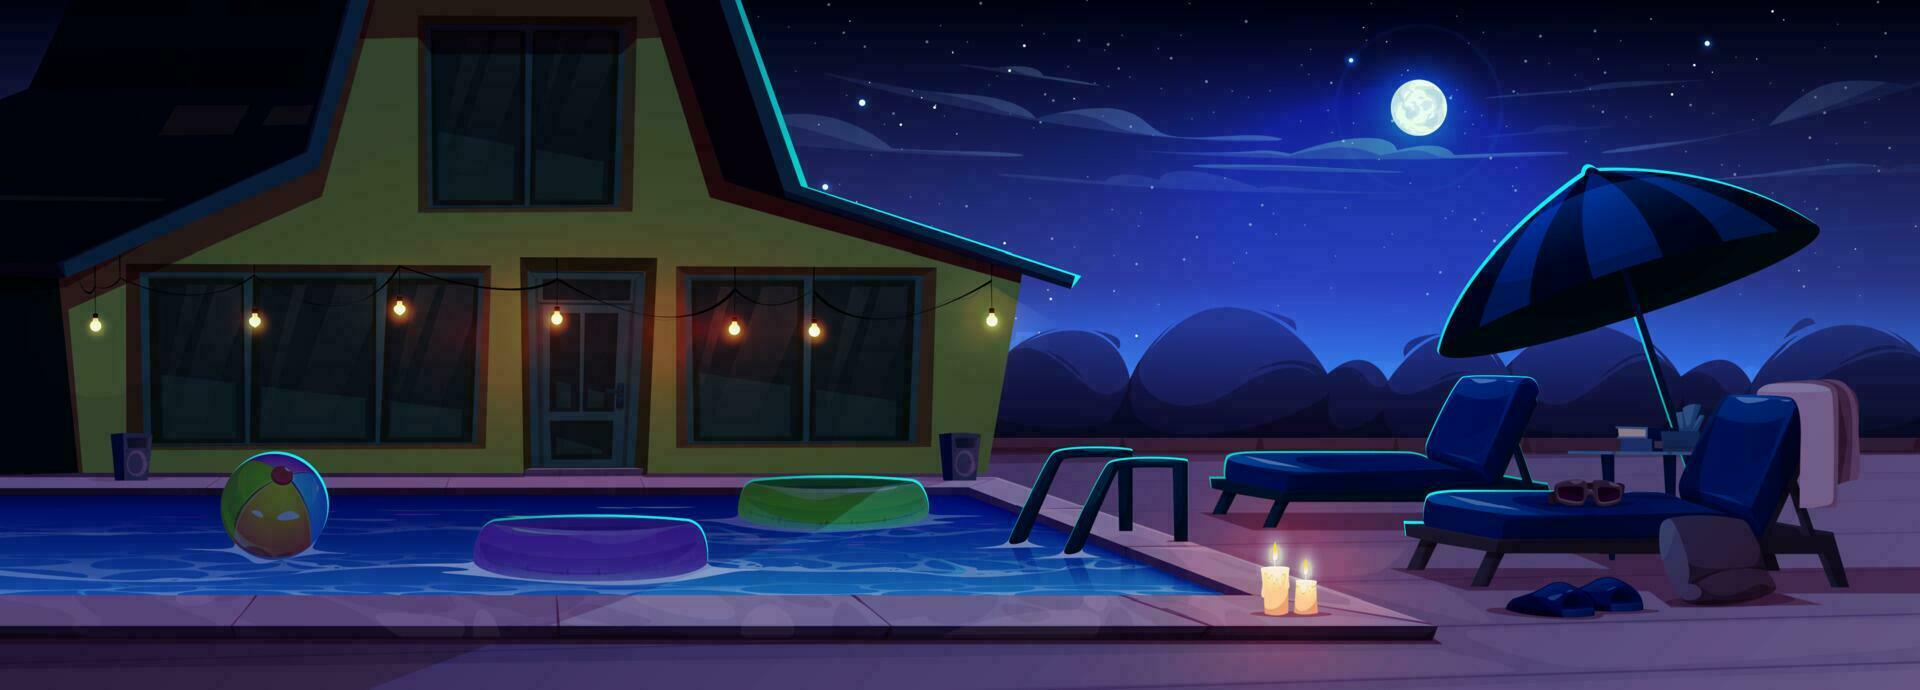 Cartoon beach house with swimming pool at night vector